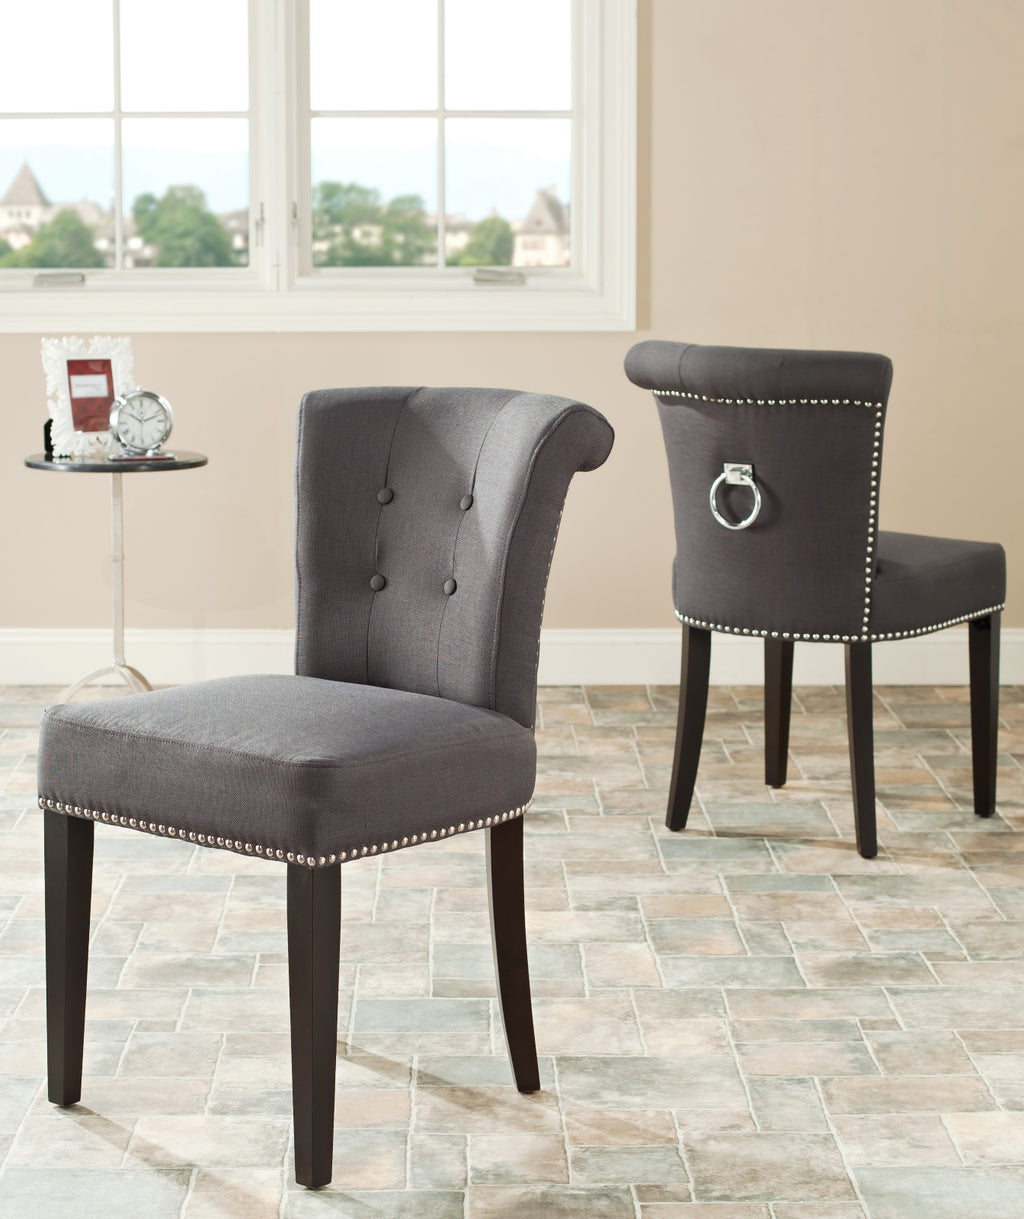 Safavieh Sinclair Ring Chair (SET Of 2)-Silver Nail Heads Charcoal and Espresso  Feature